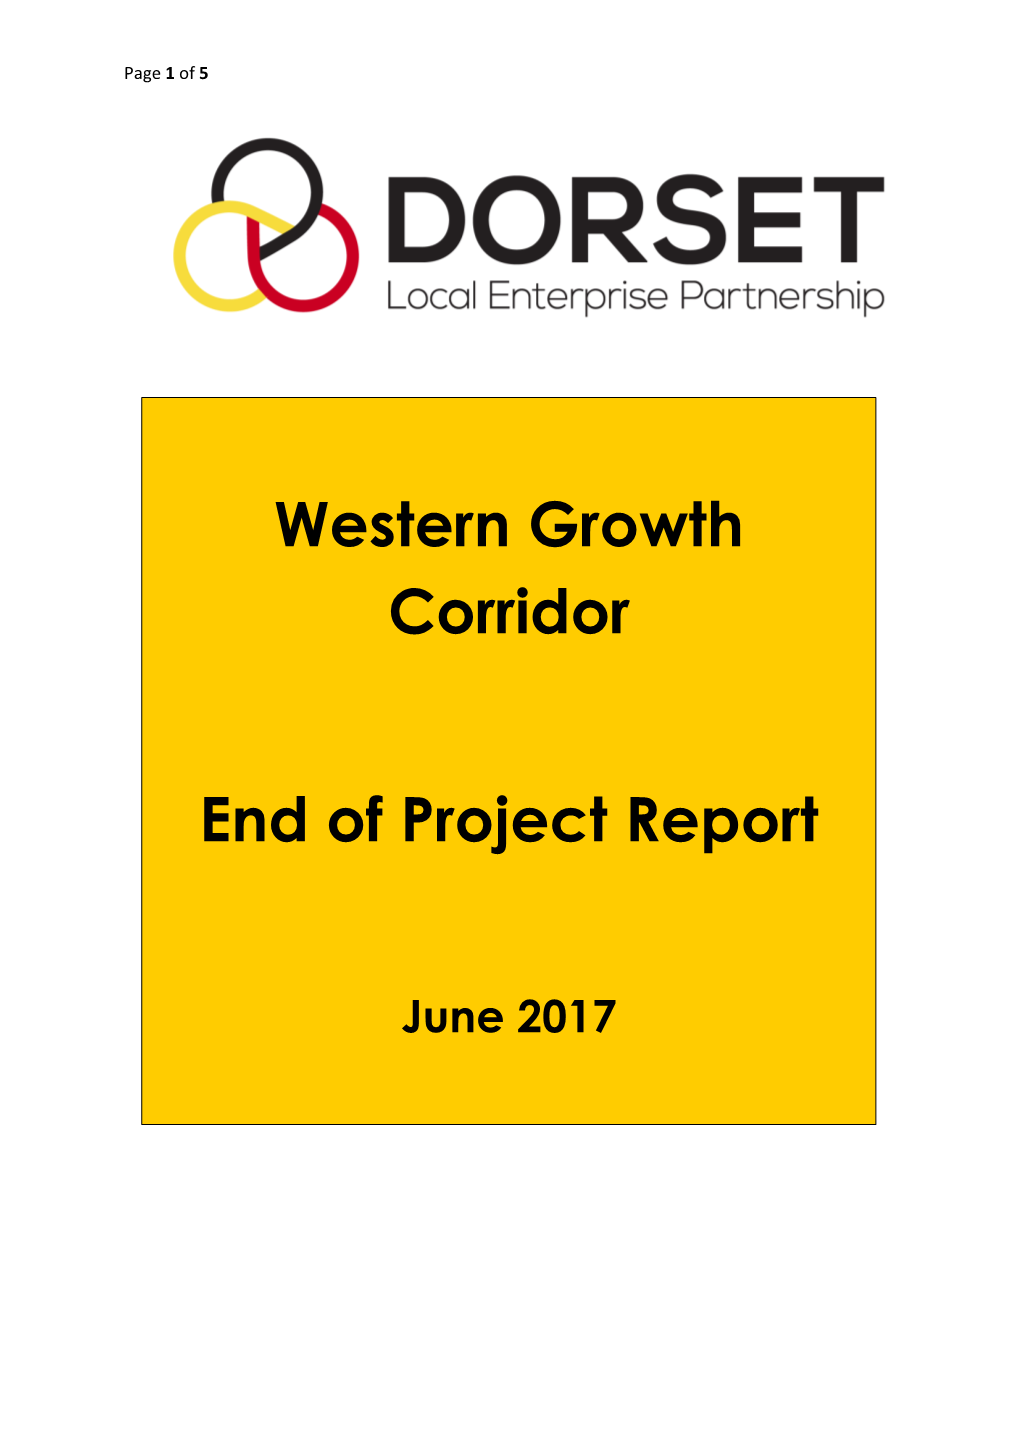 Western Growth Corridor End of Project Report